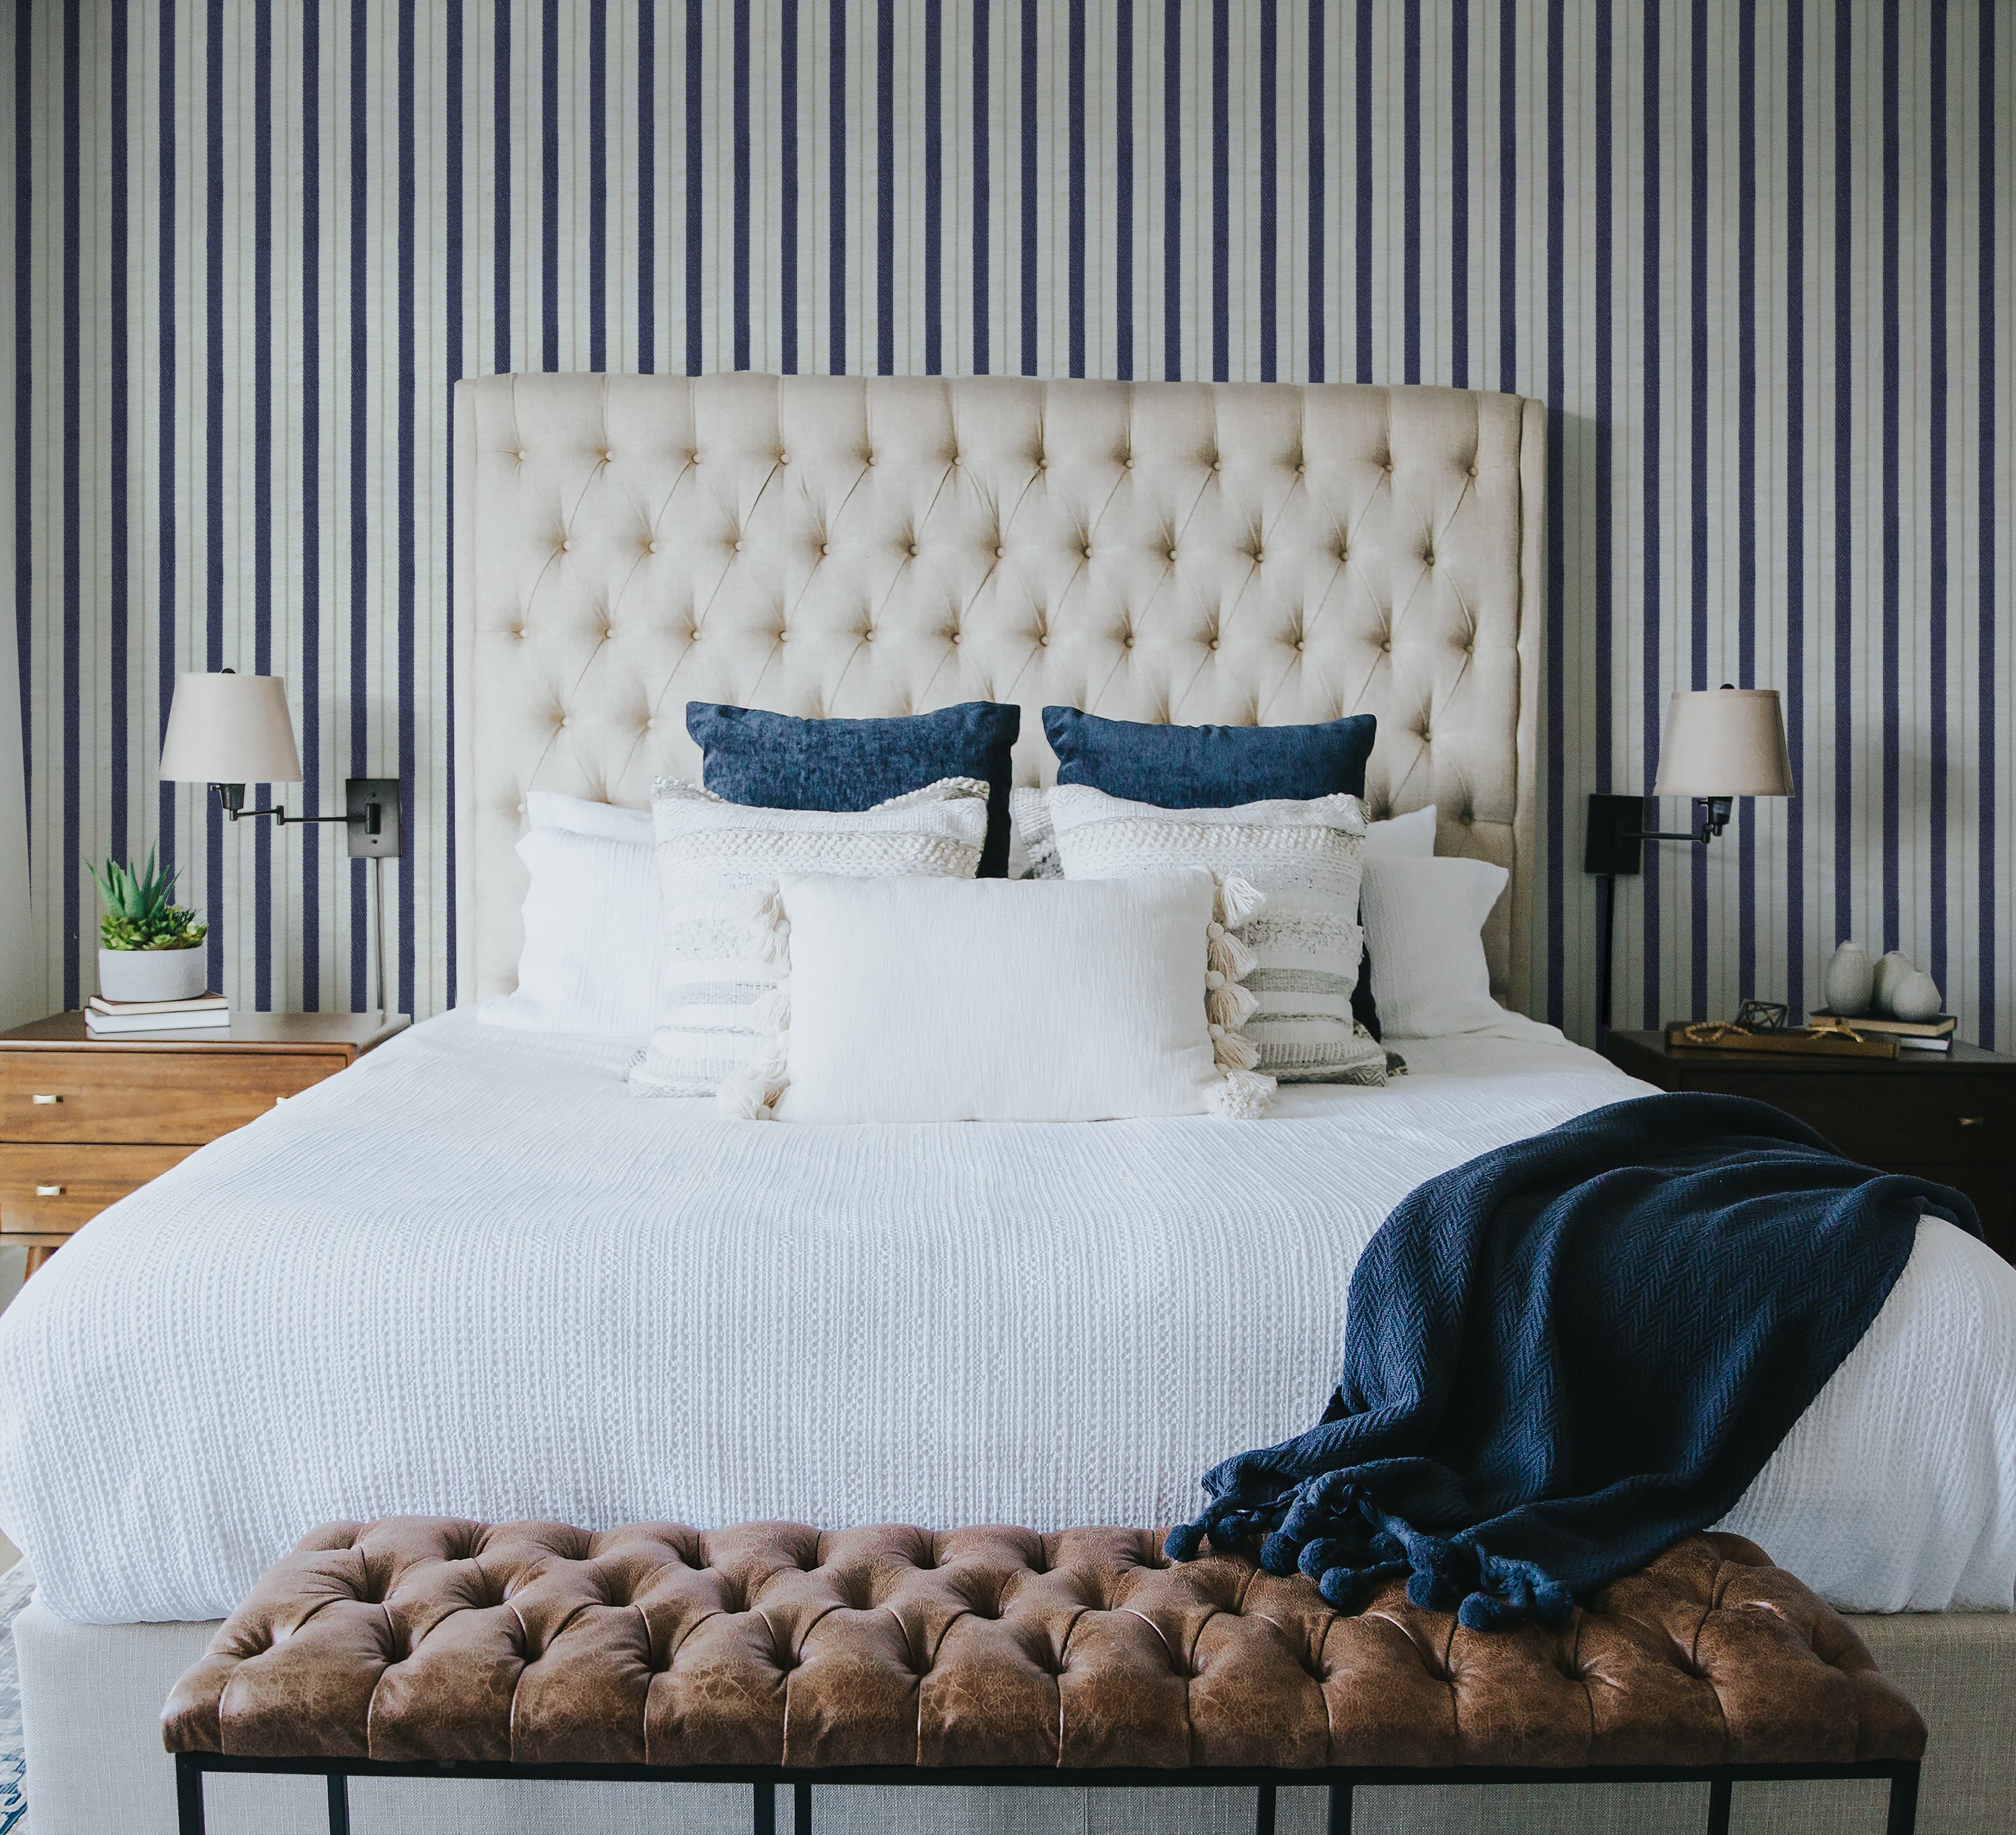 A stylish bedroom with a large tufted beige headboard against a wall covered in navy and white striped wallpaper. The bed is dressed in white linens with navy and white accent pillows and a navy throw blanket. Nightstands with lamps and small decor items flank the bed, creating a cozy and elegant ambiance